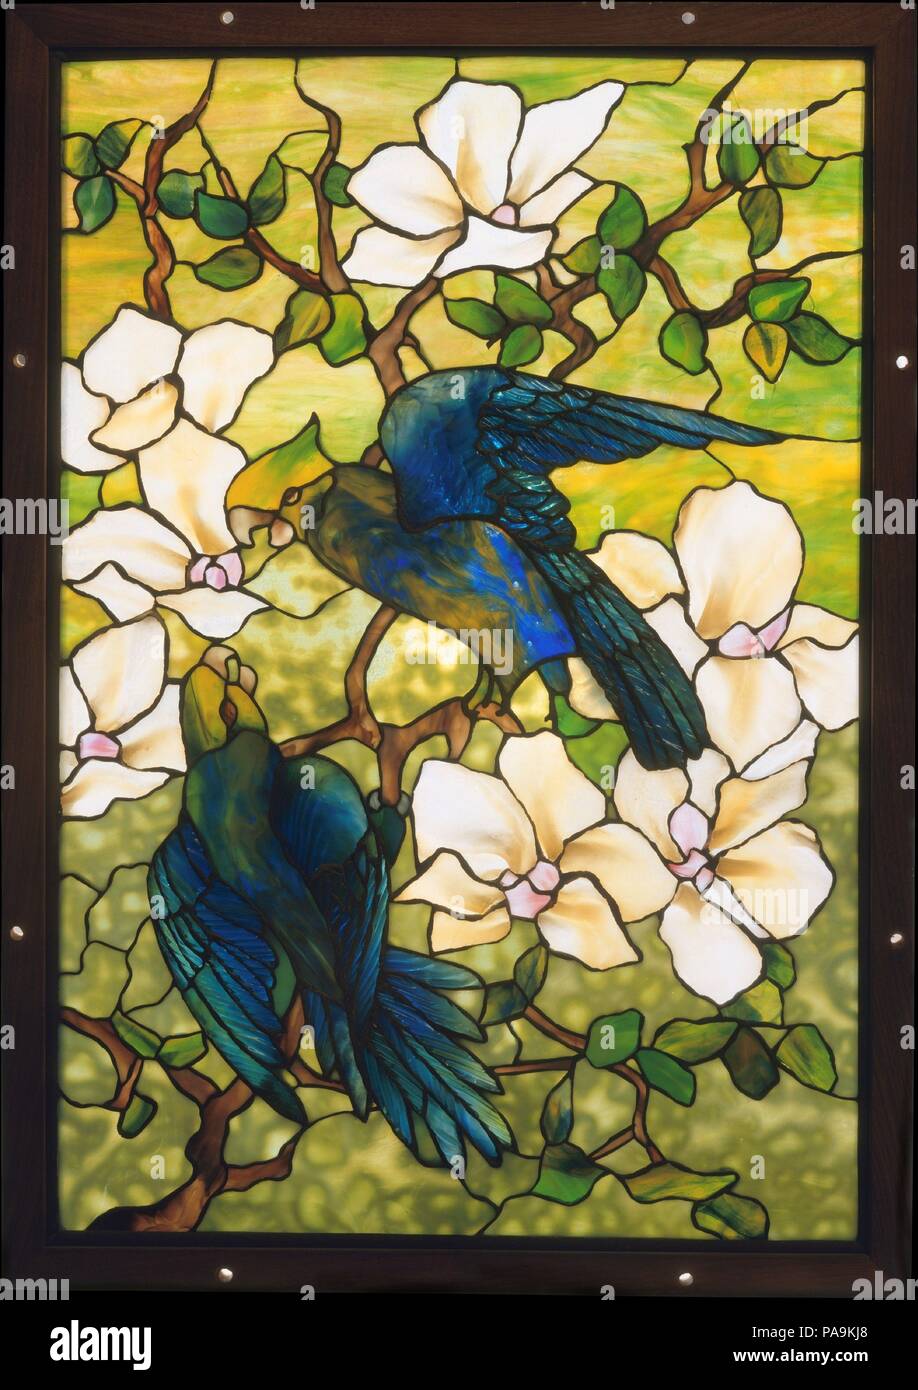 Hibiscus and Parrots. Culture: American. Designer: Designed by Louis Comfort Tiffany (American, New York 1848-1933 New York). Dimensions: 26 x 17 3/4 in. (66 x 45.1 cm). Maker: Tiffany Studios (1902-32). Date: ca. 1910-20.  This vibrant window of hibiscus and parrots reveals Tiffany's brilliant use of color and texture. Shading within the glass creates form for the birds' heads, and the mixed blues and greens produce their dramatic plumage, with the tail feathers given greater realism through the texture of the glass. Tiffany's distinctive mottled glass gives the impression of sunlight filtere Stock Photo